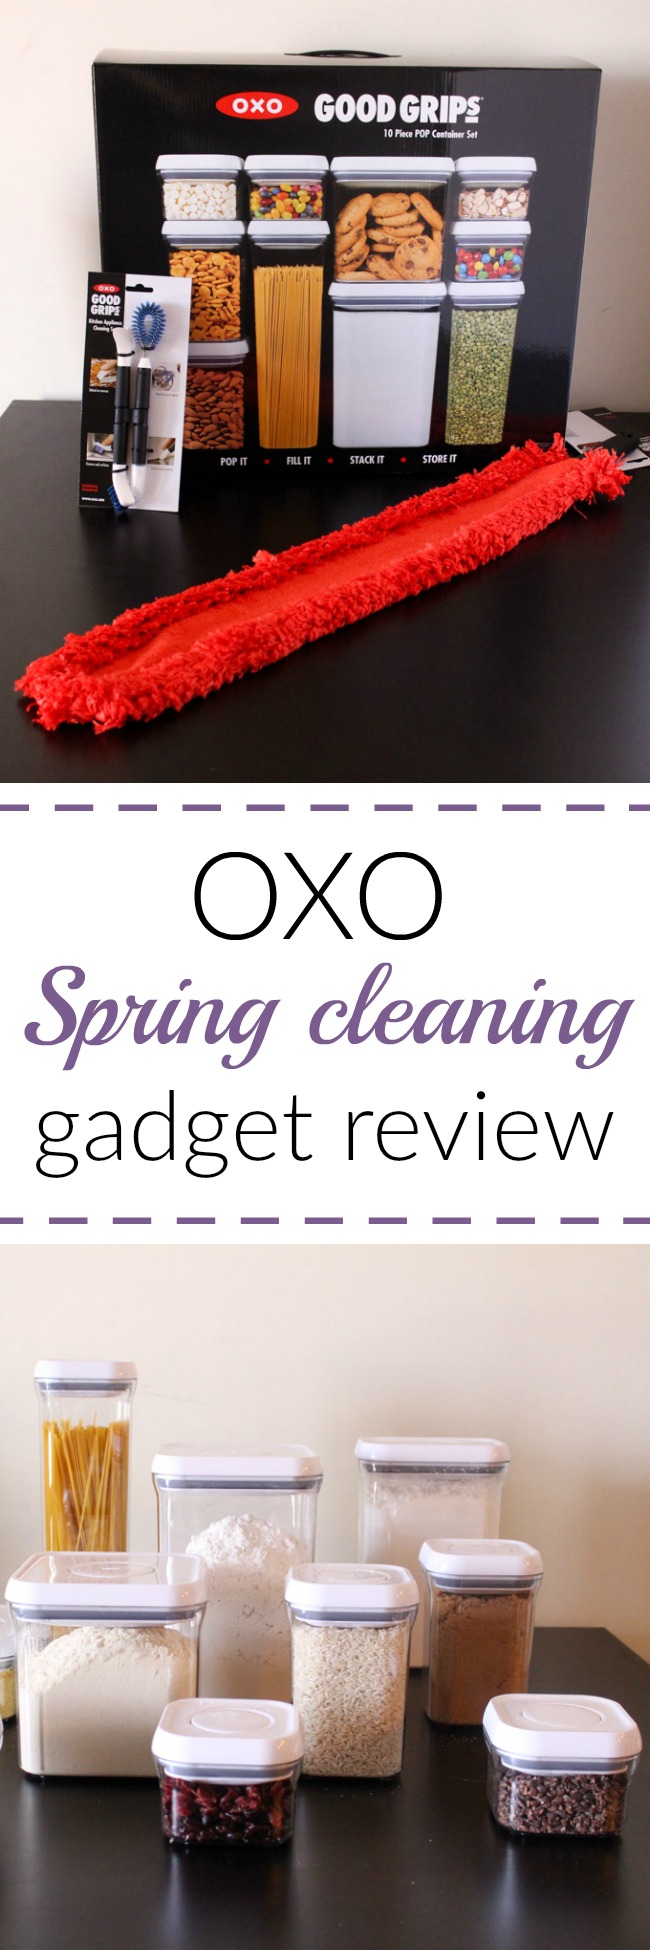 Review: OXO Spring Cleaning & Organizing Tools - Cooking is Messy